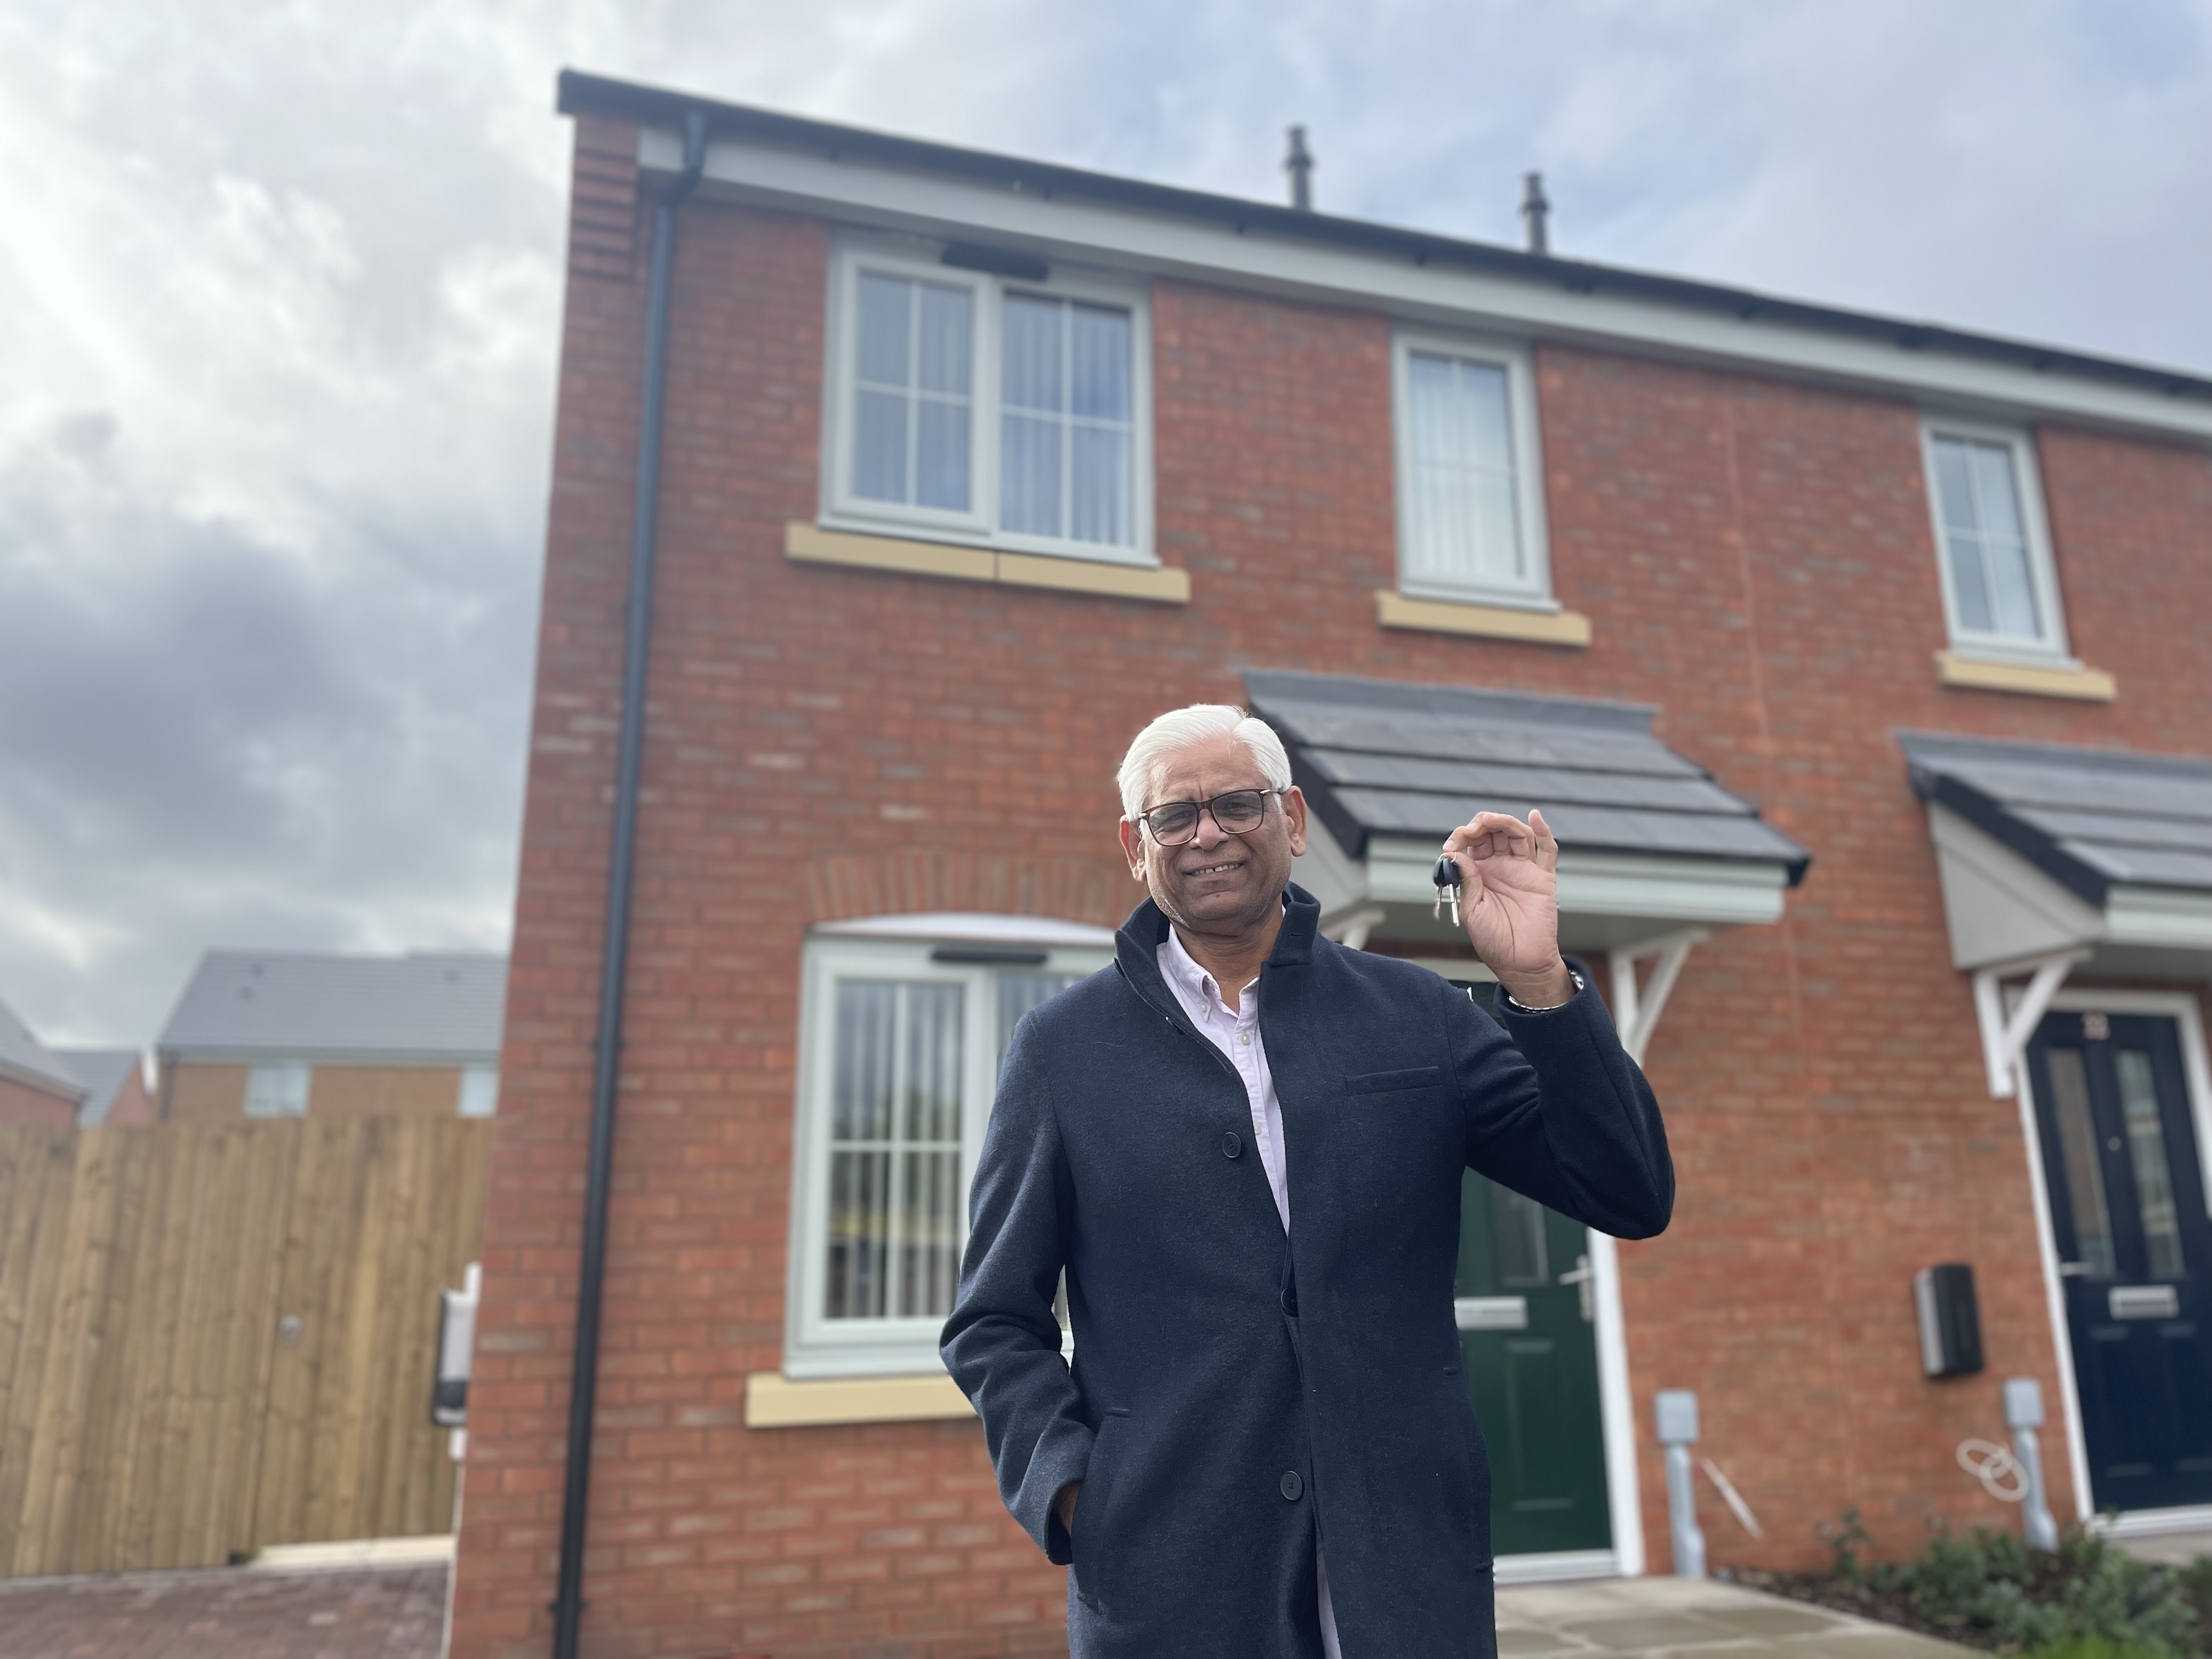 Mukarram Jahanzaib who lives in a shared ownership home on the Lockside estate.